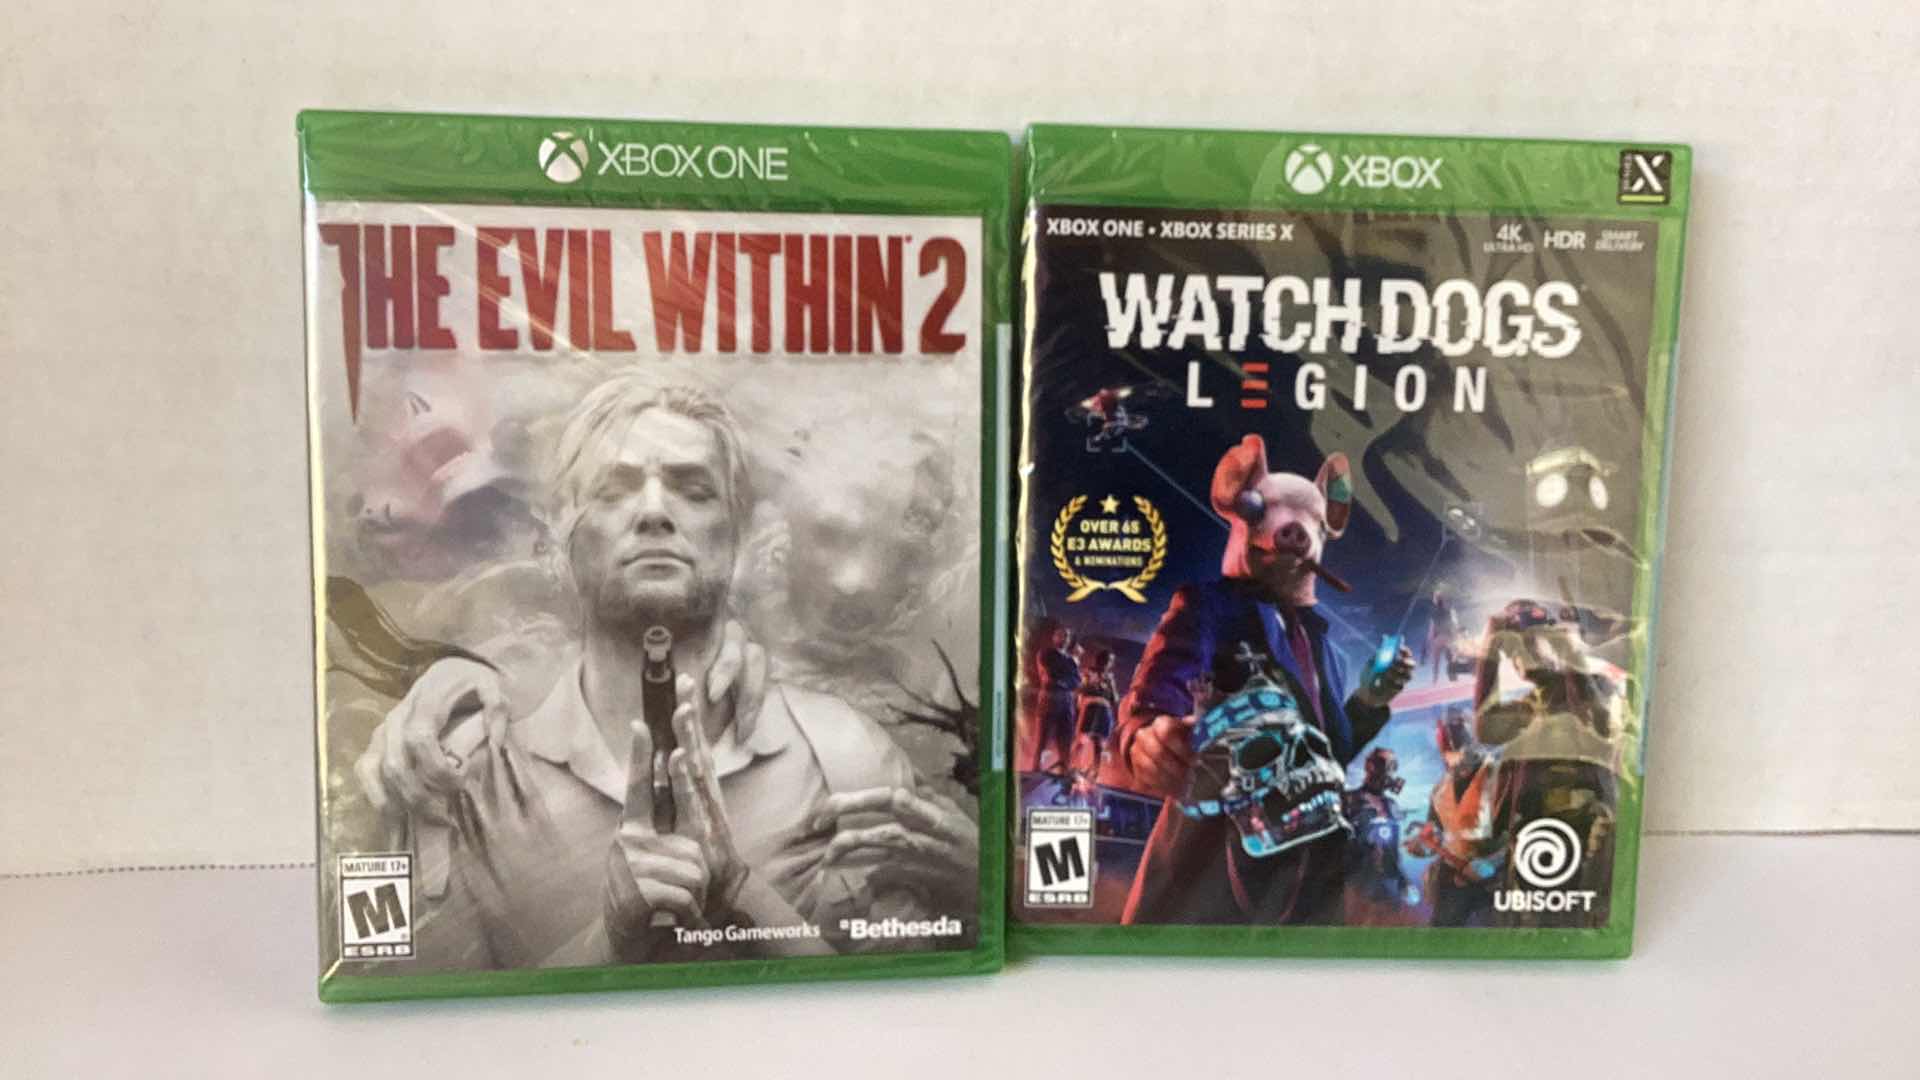 Photo 1 of 2 NEW X-BOX GAMES: THE EVIL WITHIN 2 AND WATCH DOGS LEGION